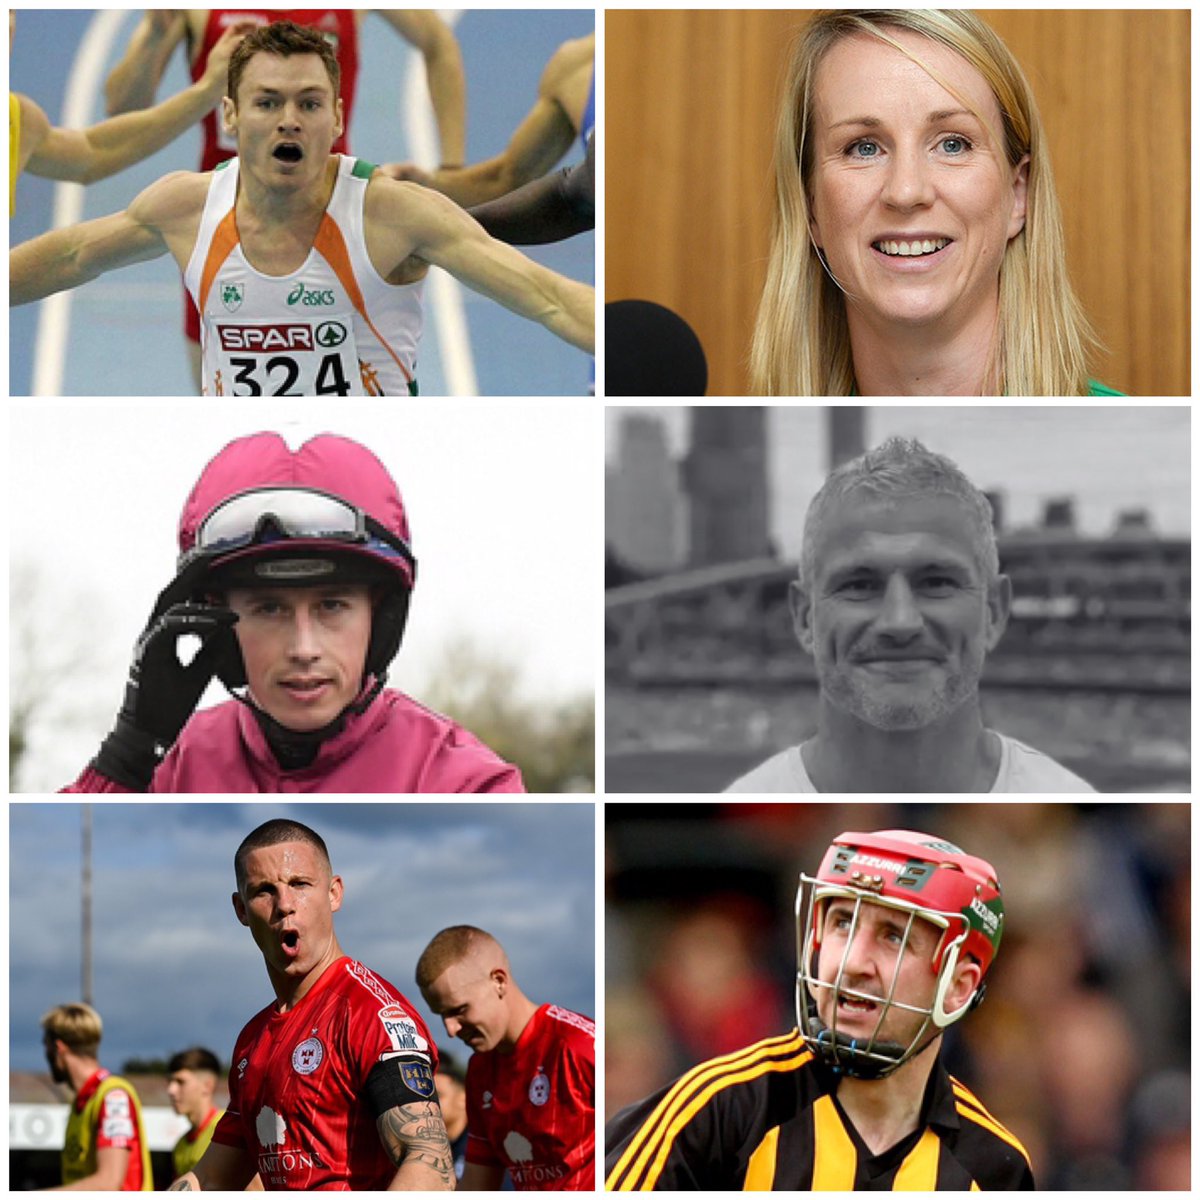 Long intrigued by the challenge retirement presents in elite sport. Very giving guests discuss their experiences & share their expertise. At The End Of The Day, @RTERadio1 tomorrow at 2pm 📑@sportpsychkate 🏃@DavidGillick ⚽️@LukeByrne93 🏑@11larky 🏇🏻@92bryan92 🏉@TomMay1